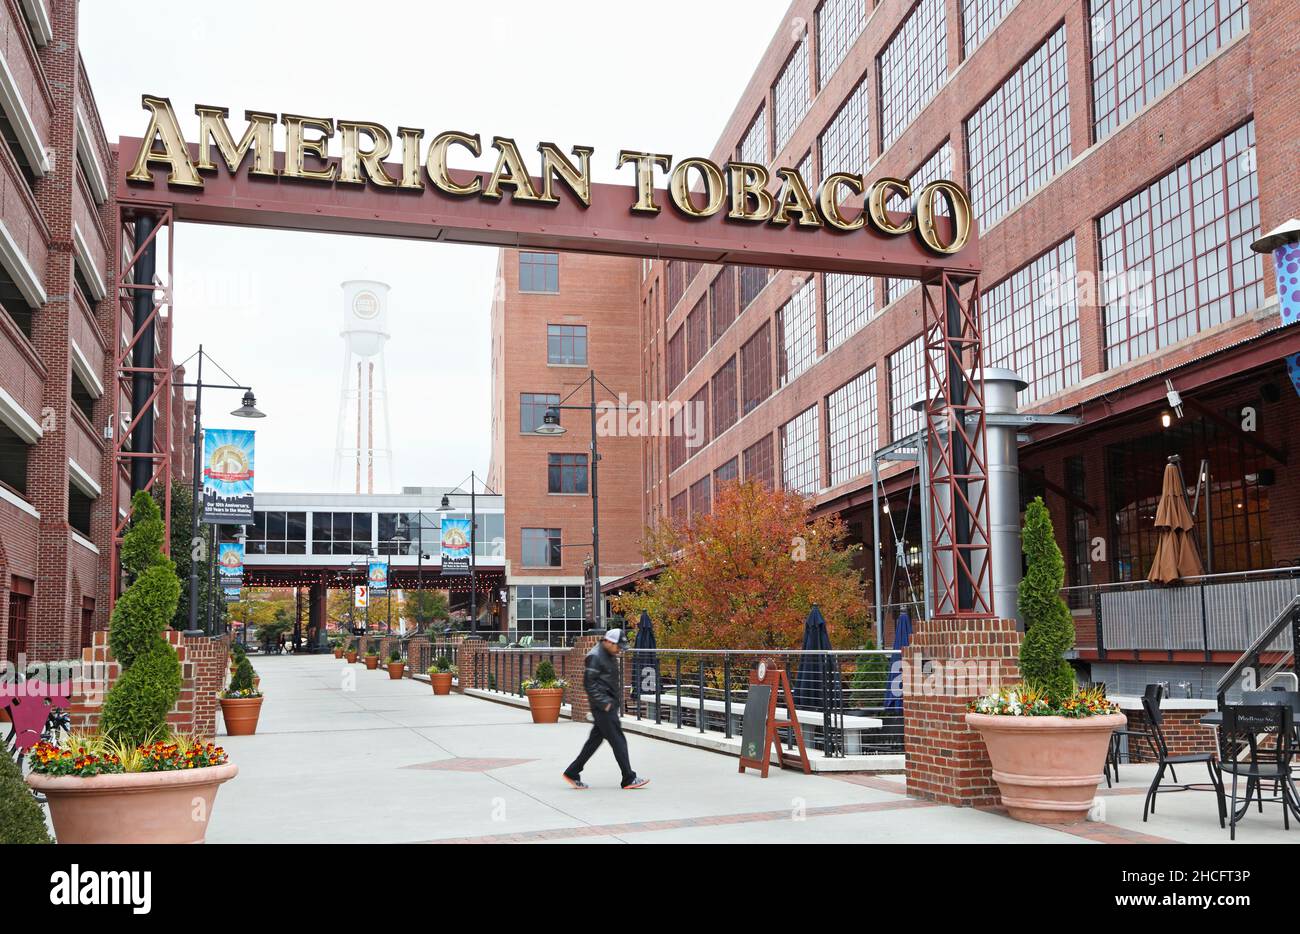 American Tobacco warehouse district, Durham, North Carolina. Converted old Tobacco warehouses into business offices and restaurants. Stock Photo